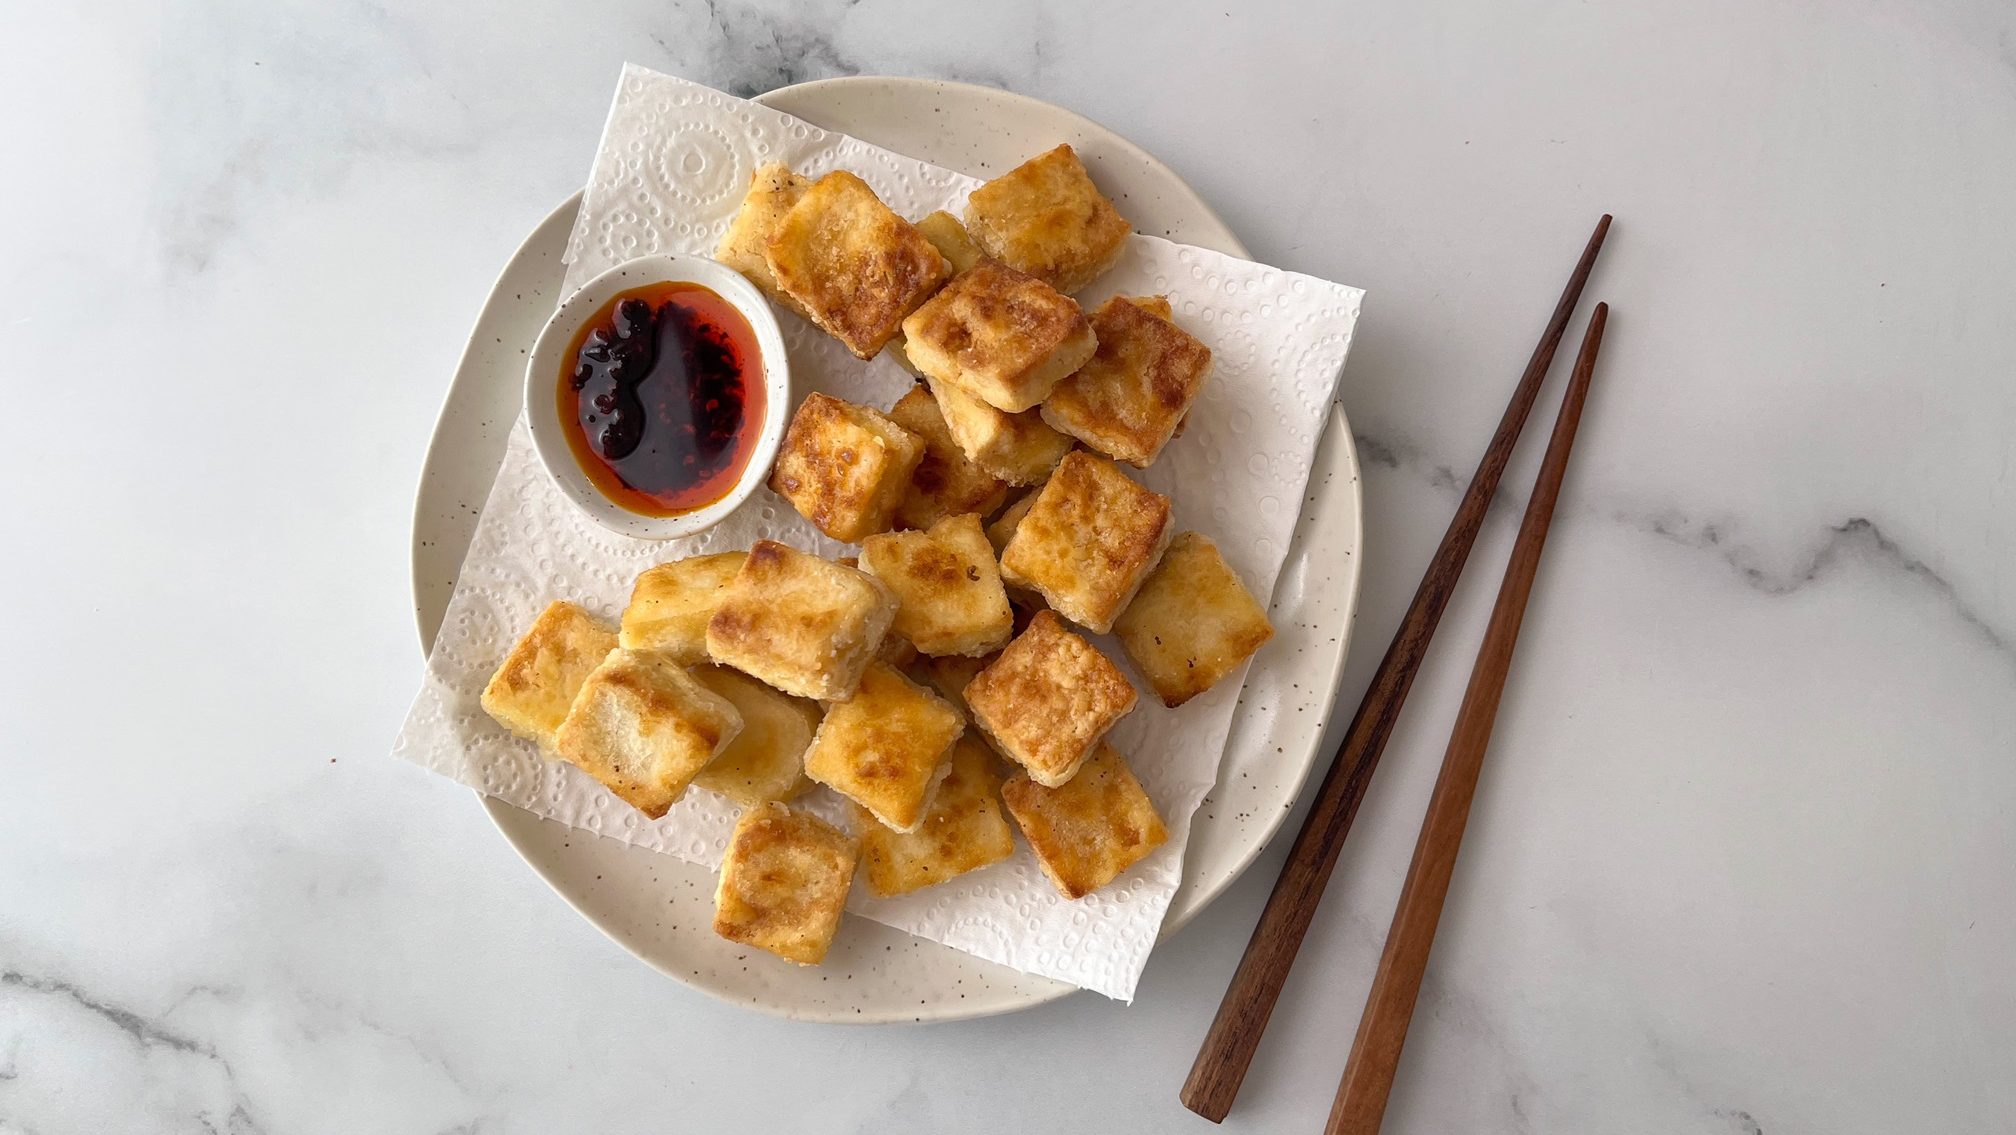 Crispy fried cubed foods on paper towel lined plate with a small bowl of chilli oil. Chopsticks next to it.